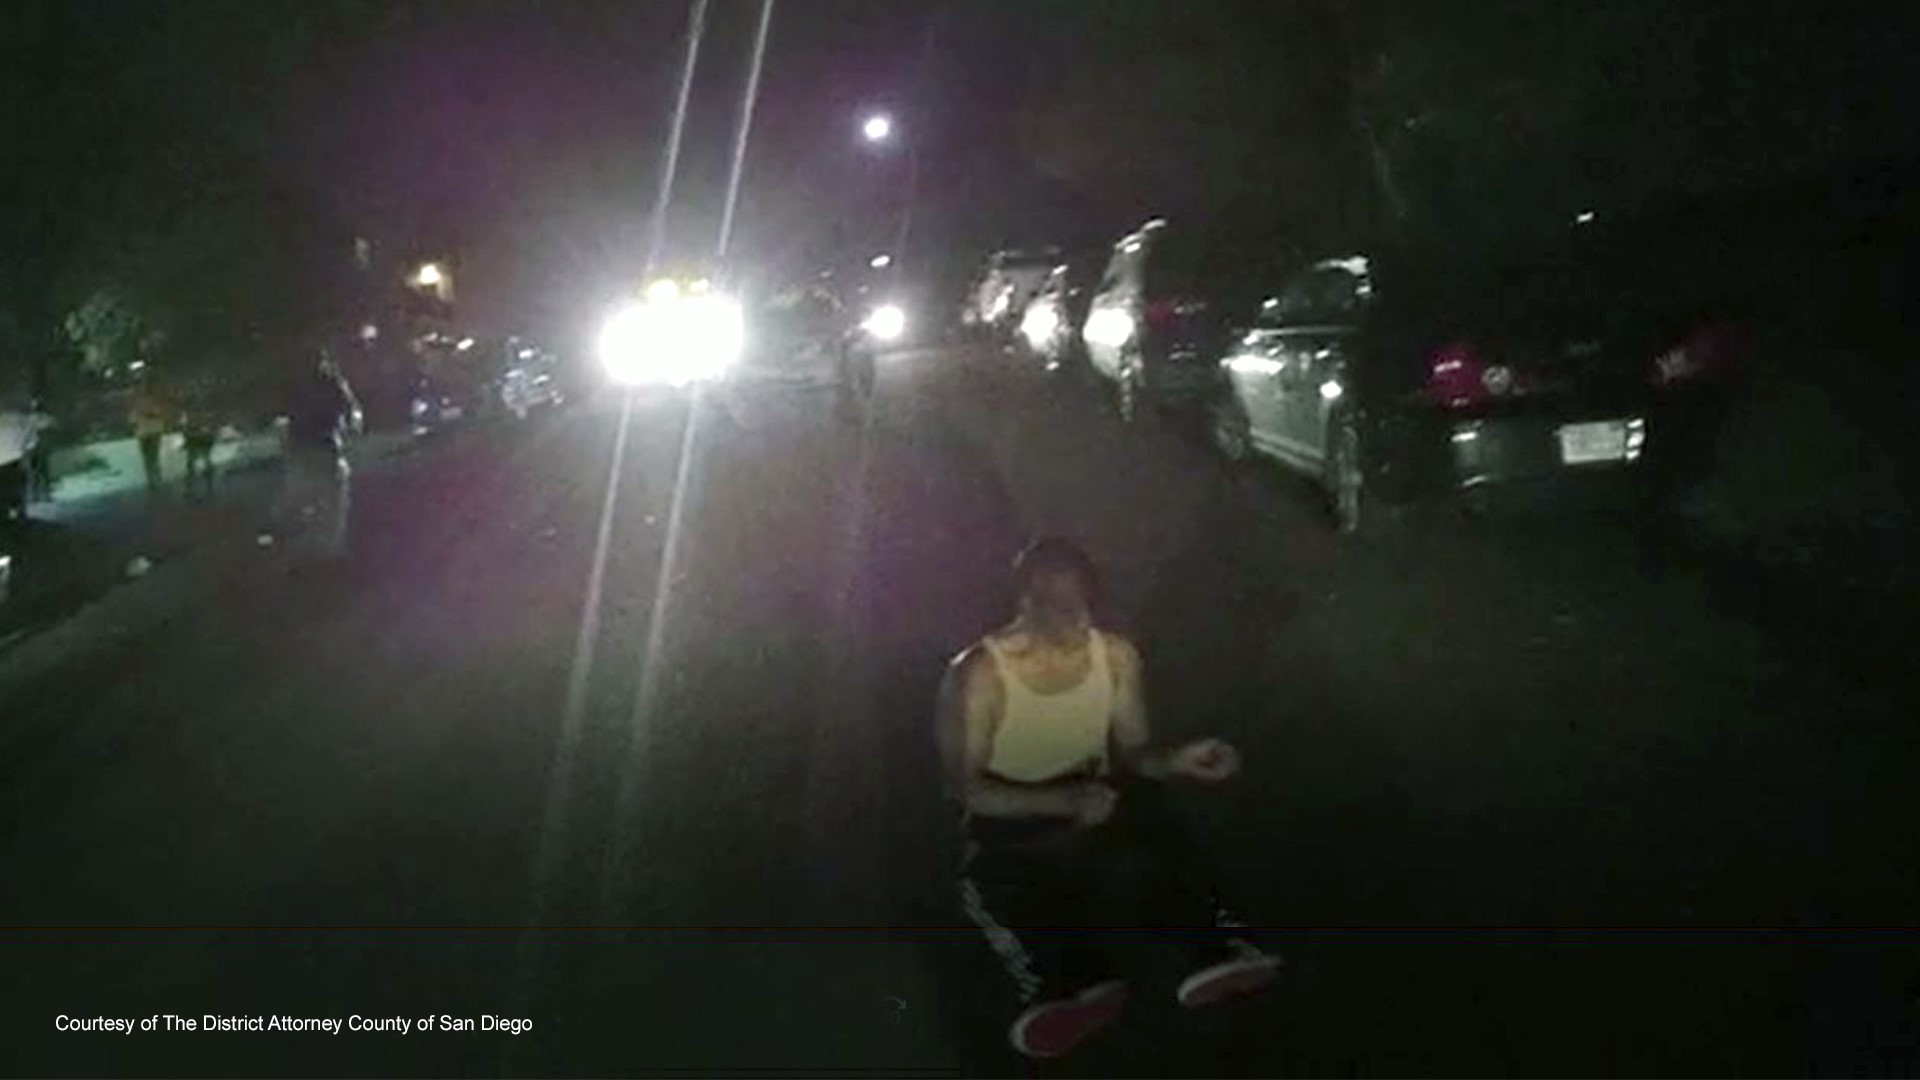 On February 26, 2019, San Diego Police responded to a report of a man, who appeared to be on drugs, was partially nude, walking into traffic, and falling down.